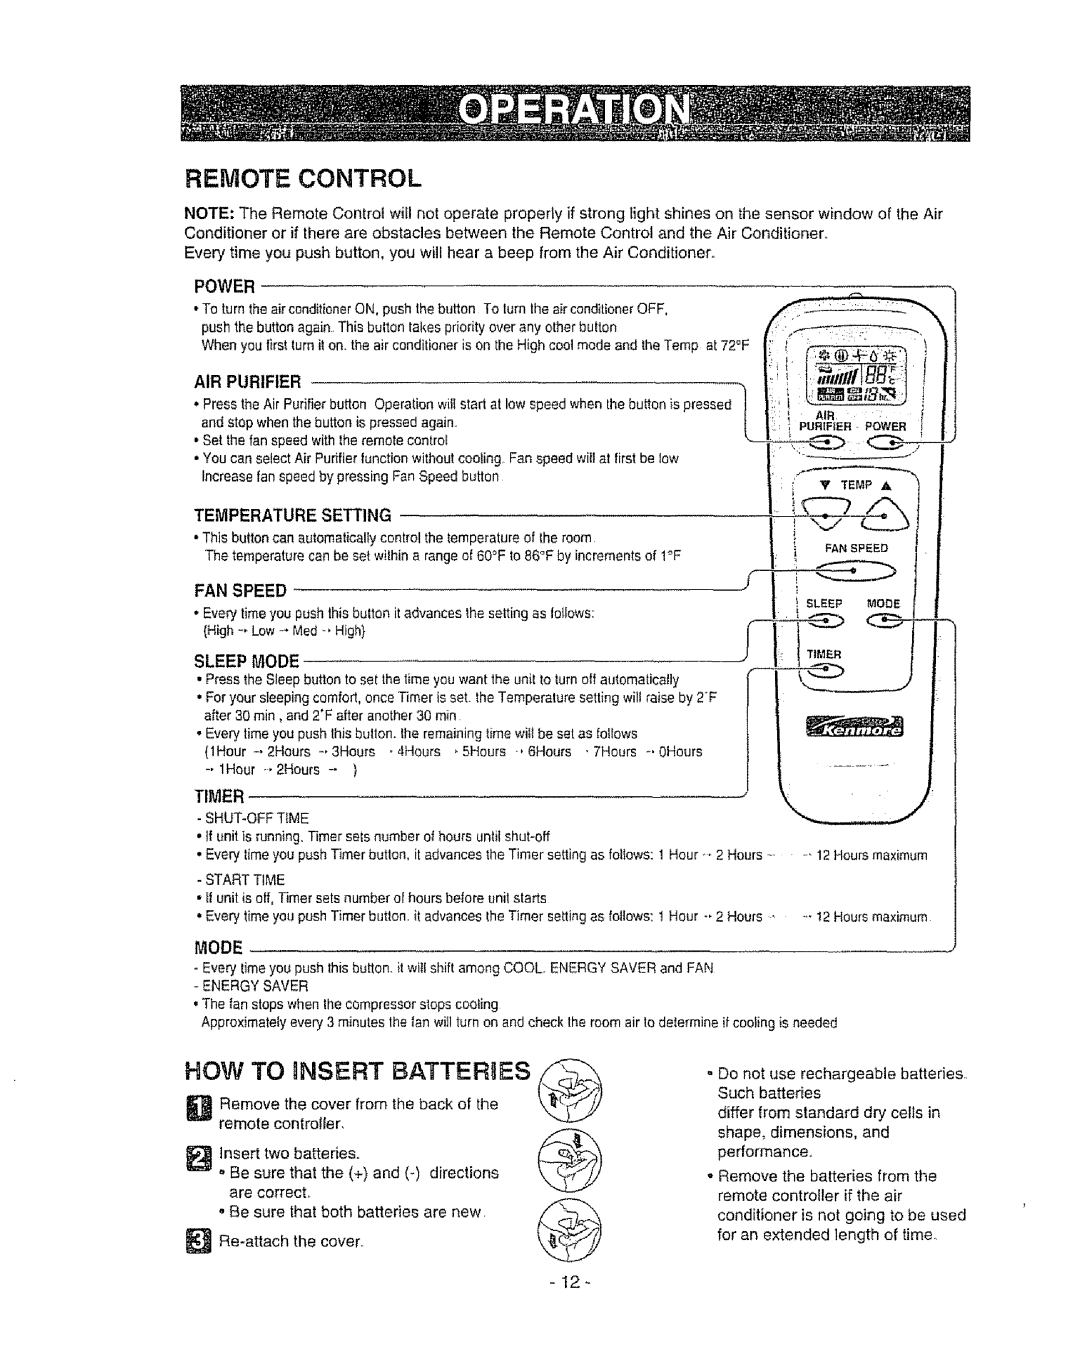 Kenmore 580. 72089 owner manual Remote Control, HOW TO iNSERT BATTERgES, Power, Air Purifier, Mode, _ Re-attachthe cover 